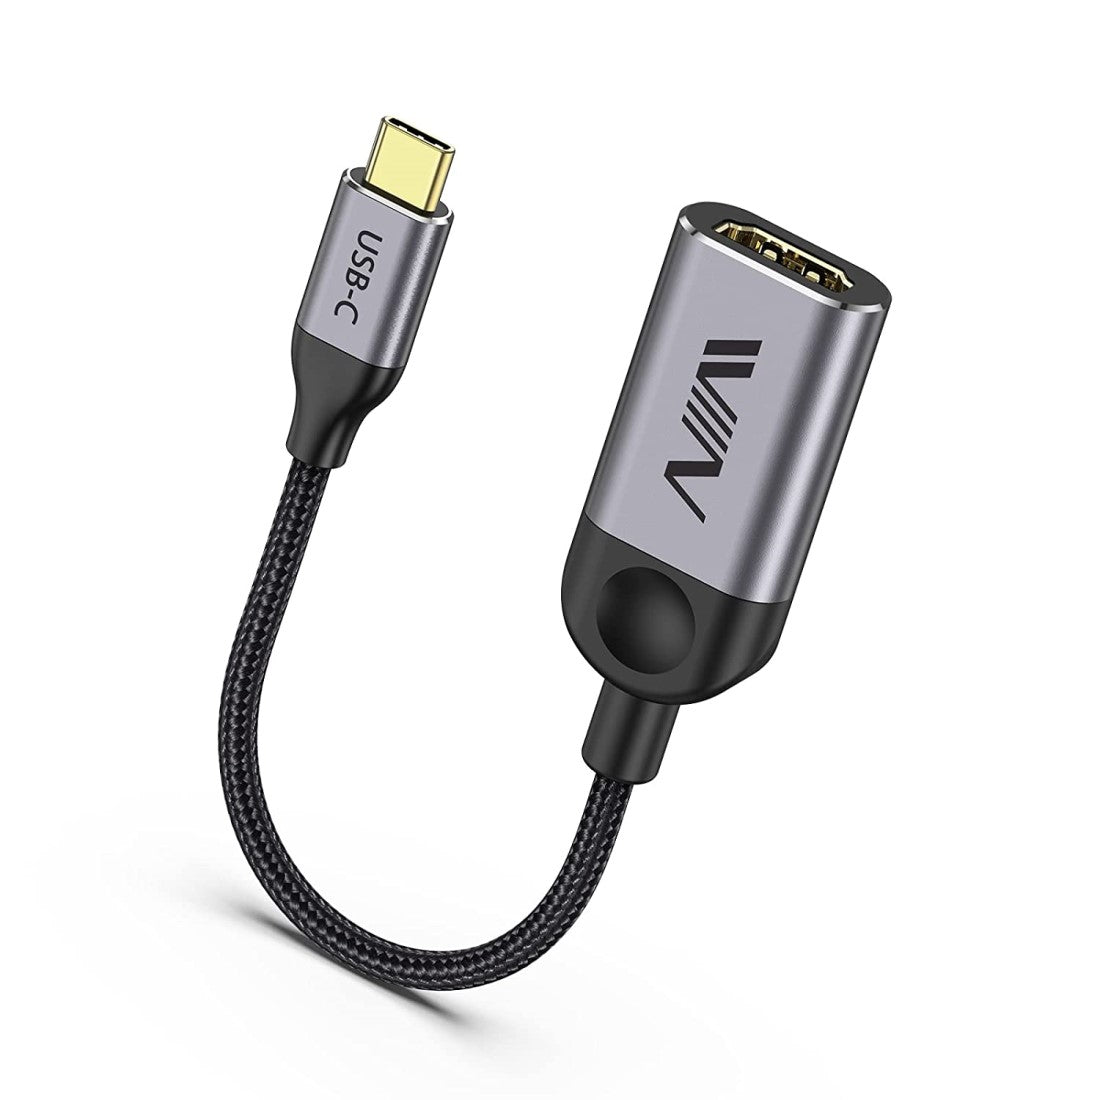 Hdmi to usb cable • Compare & find best prices today »